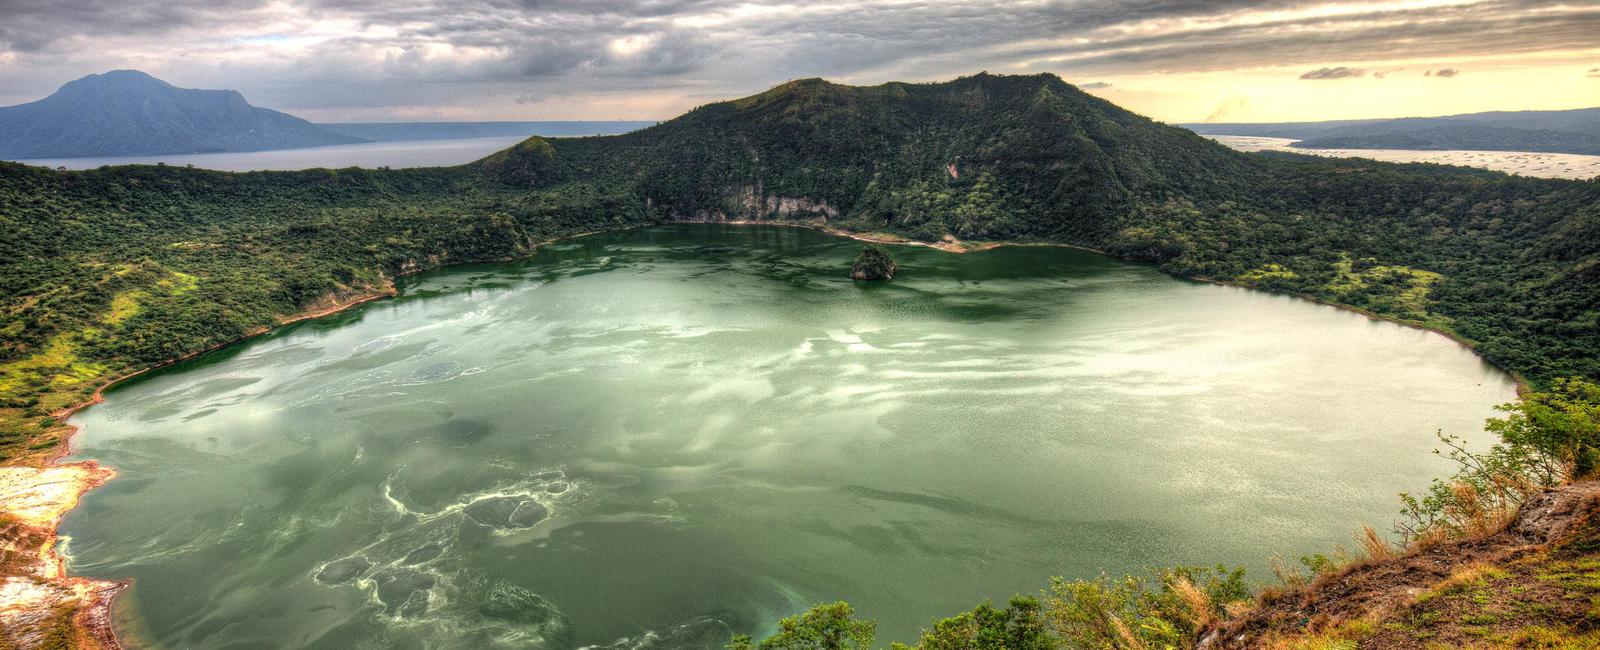 Taal is an island within a lake on an island in the philippines located just 90 minutes from manila